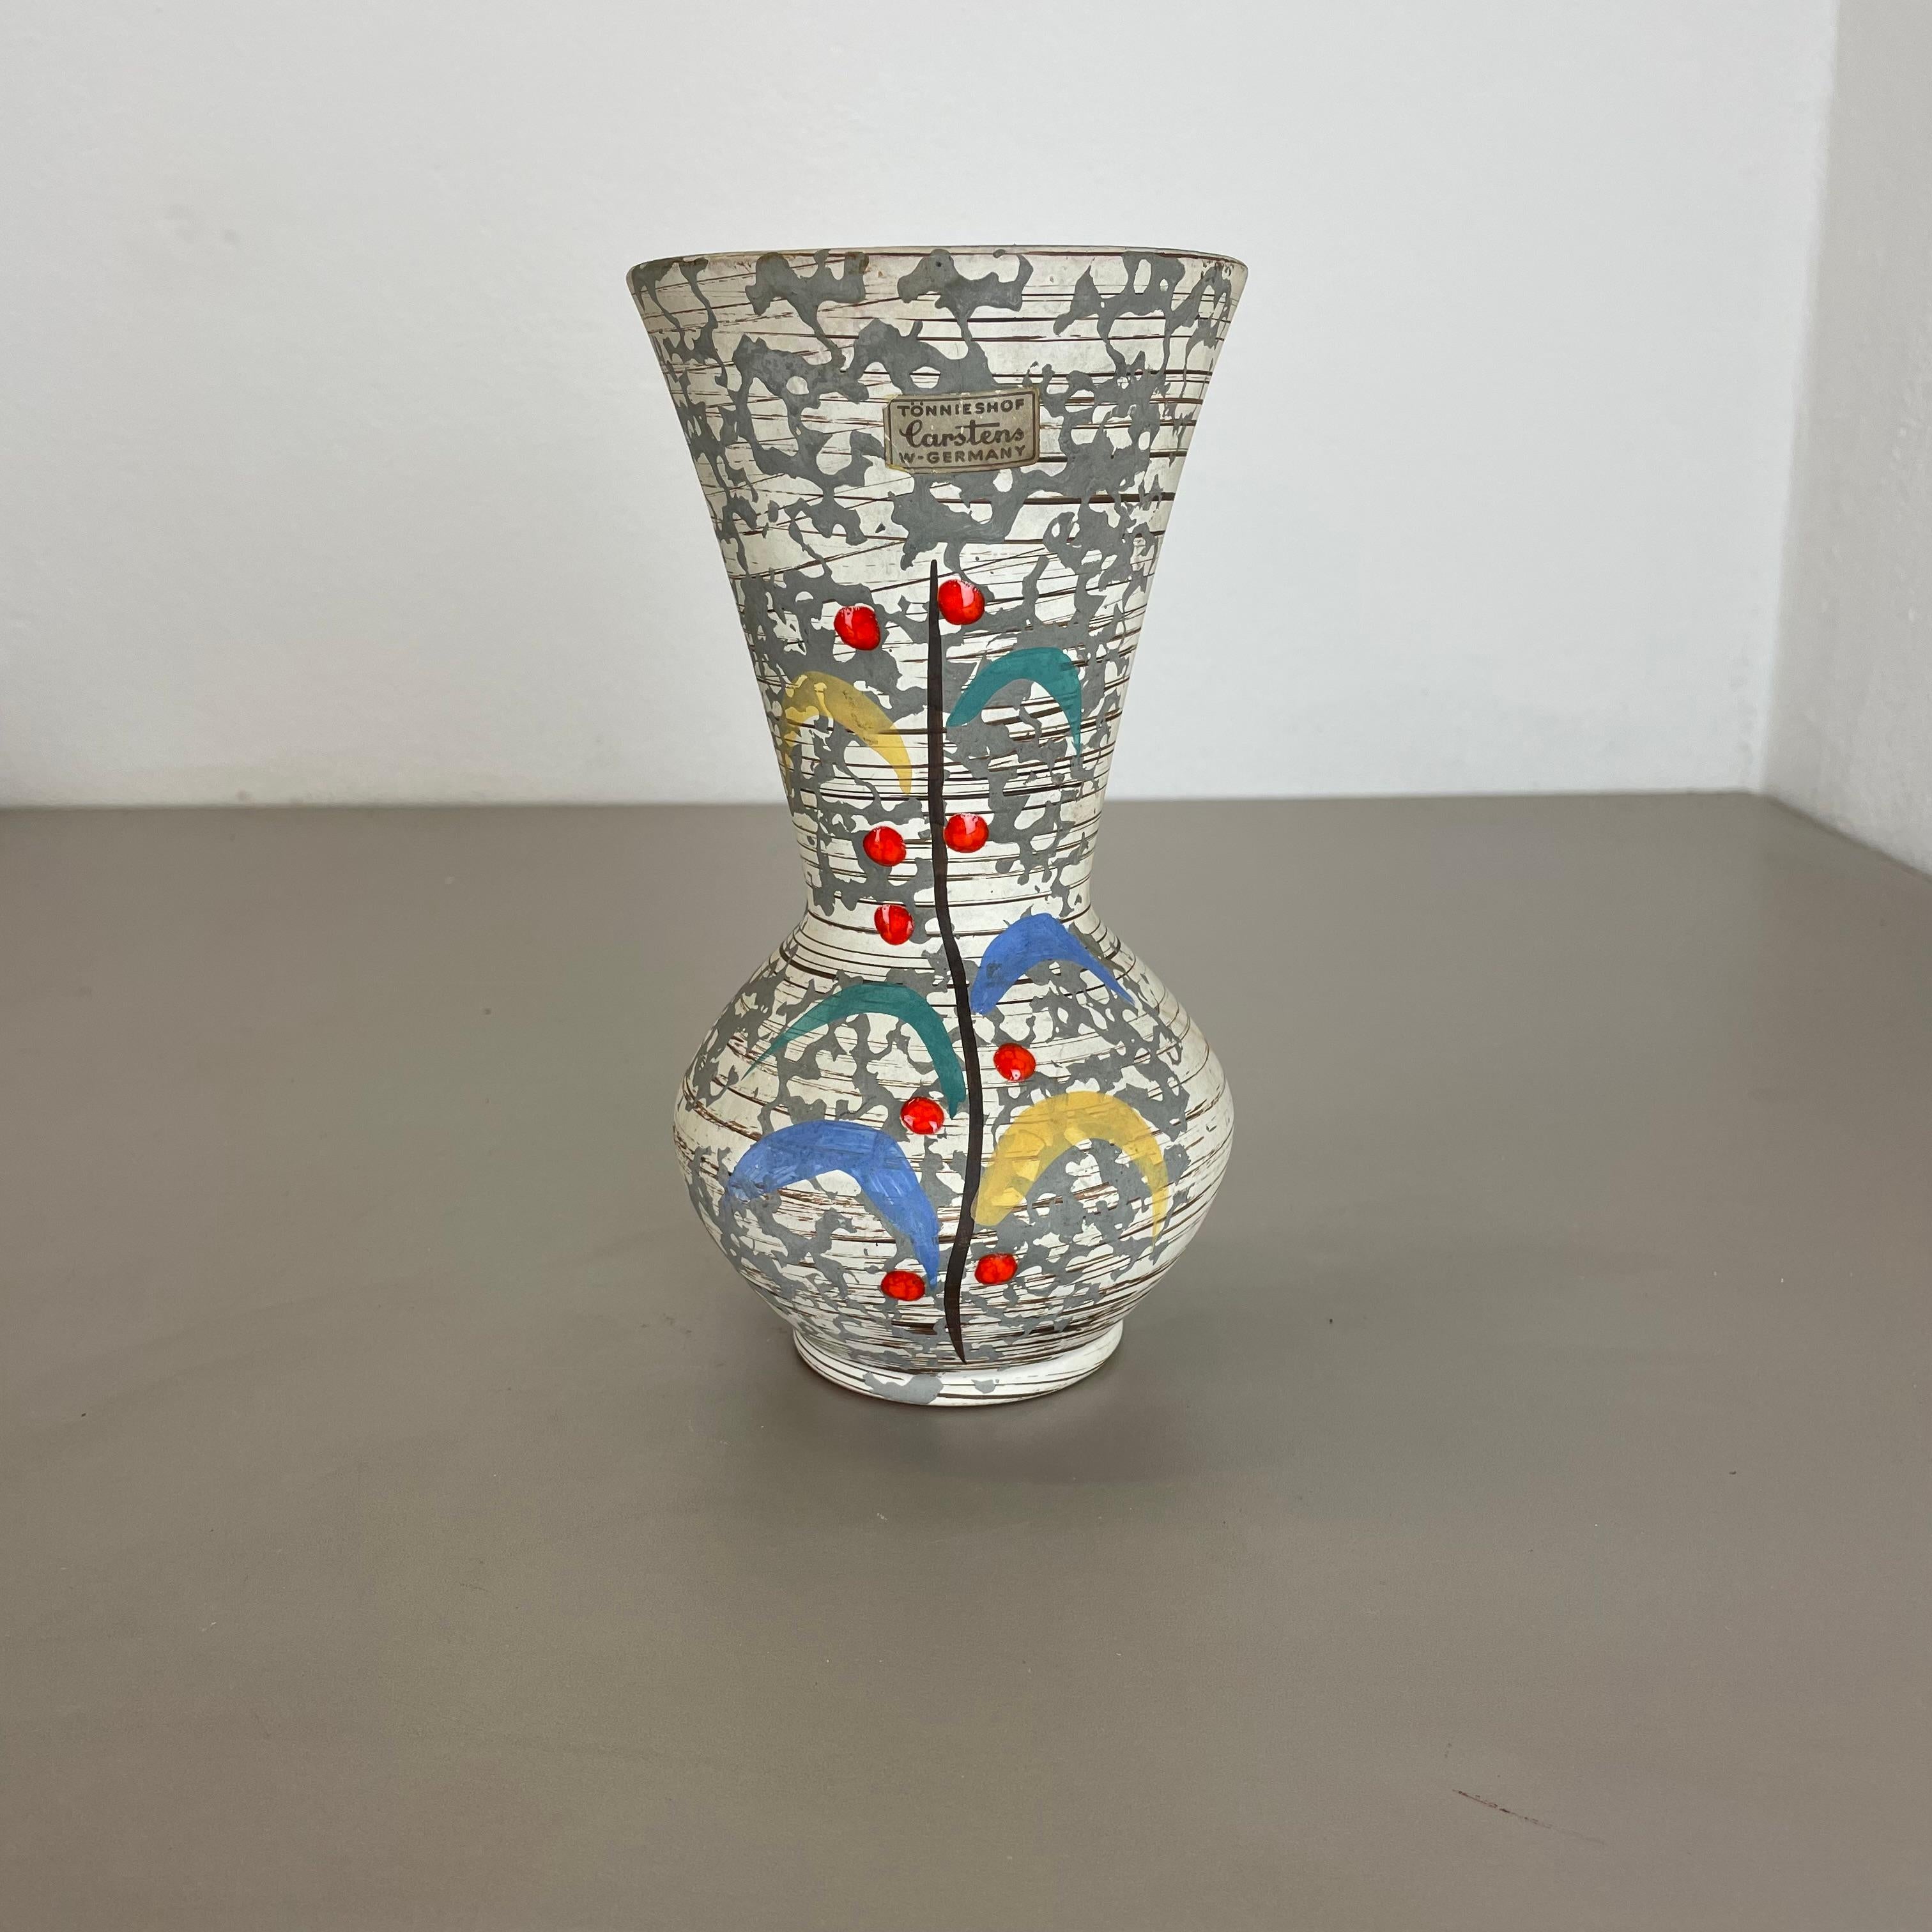 Article:

Ceramic pottery vase


Origin:

Germany



Producer:

Carstens Tönnieshof, Germany


Decade:

1950s


This original vintage pottery object was produced by Cartens Tönnieshof in the 1950s in Germany. It is made of pottery ceramic and has a